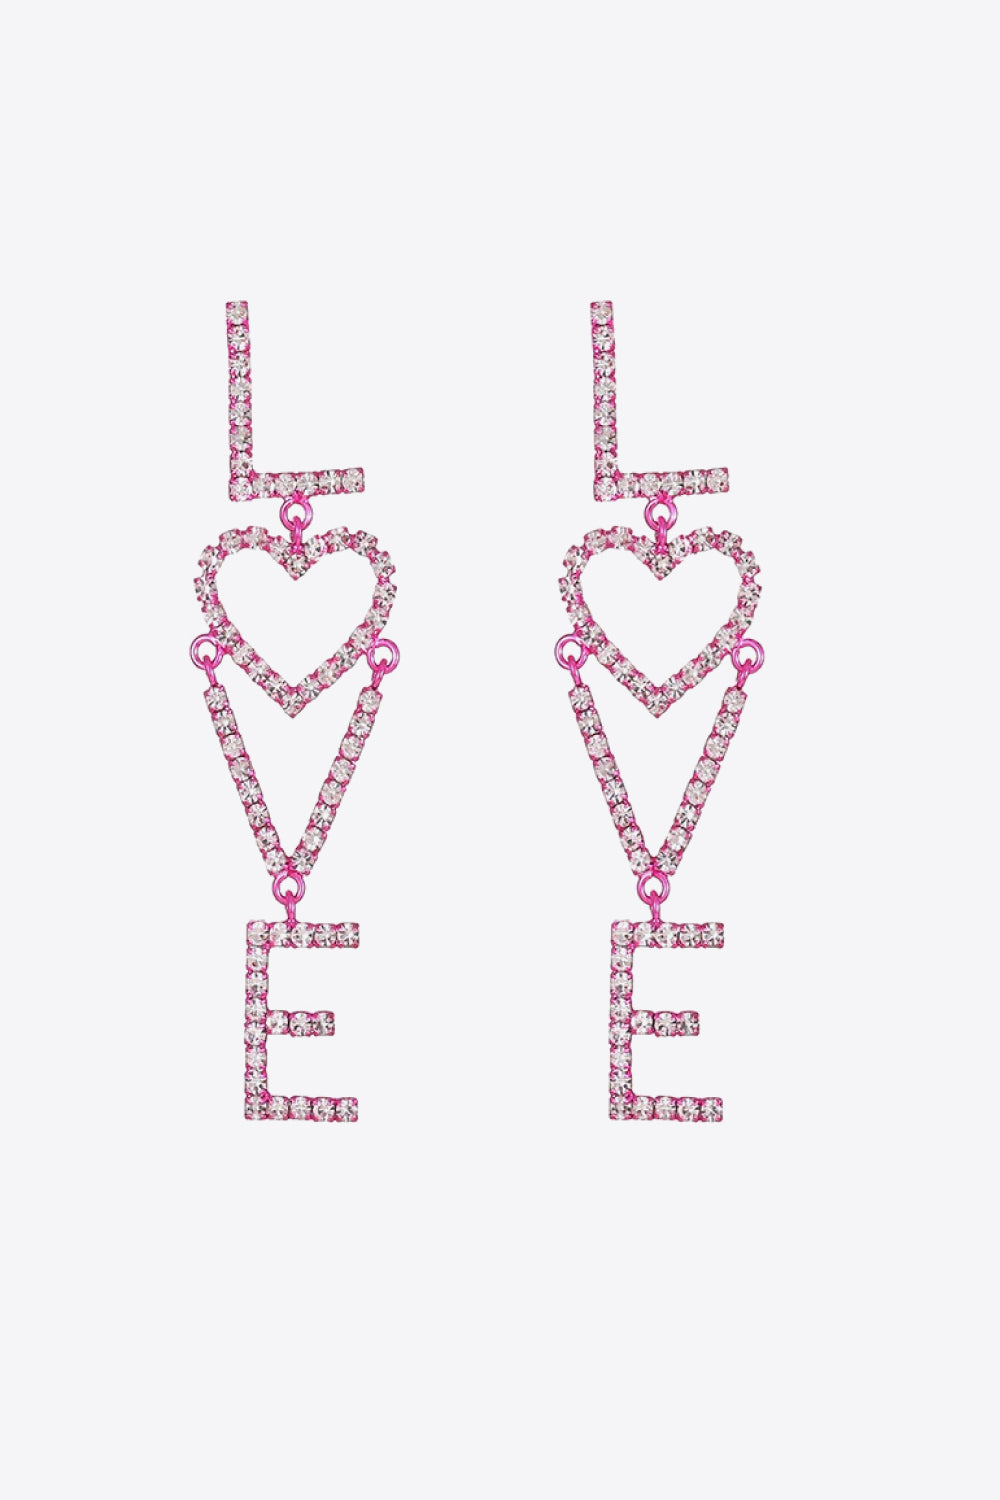 Hot Pink One Size LOVE Glass Stone Zinc Alloy Earrings - 2 styles - earrings at TFC&H Co.